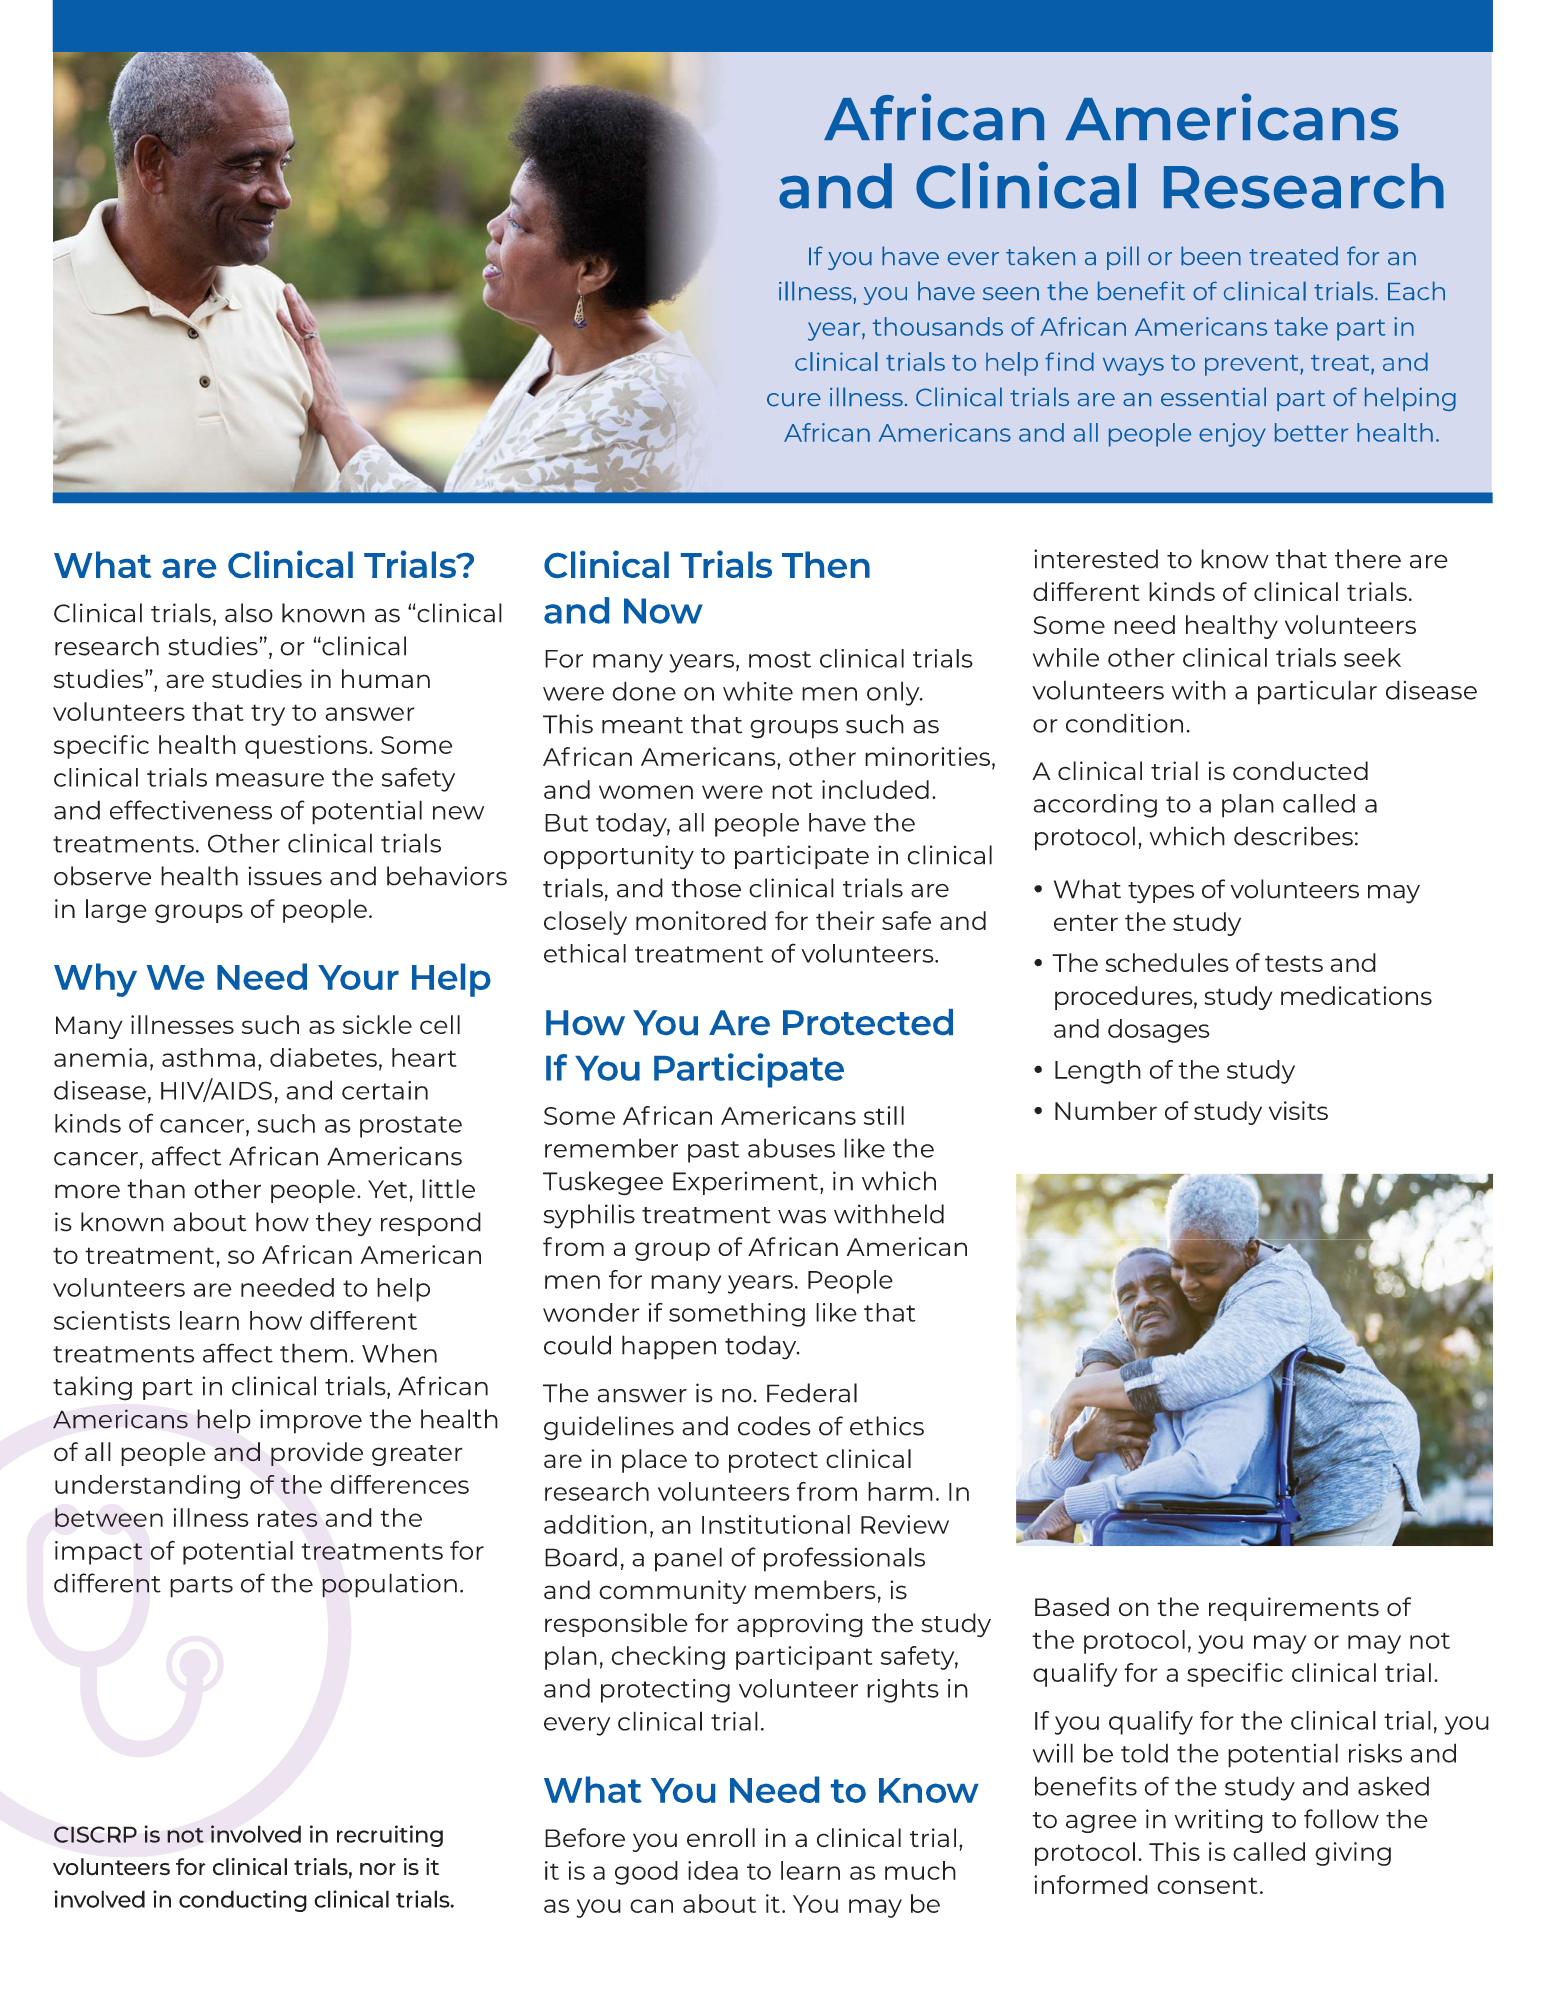 African Americans in Clinical Research graphic, page 1